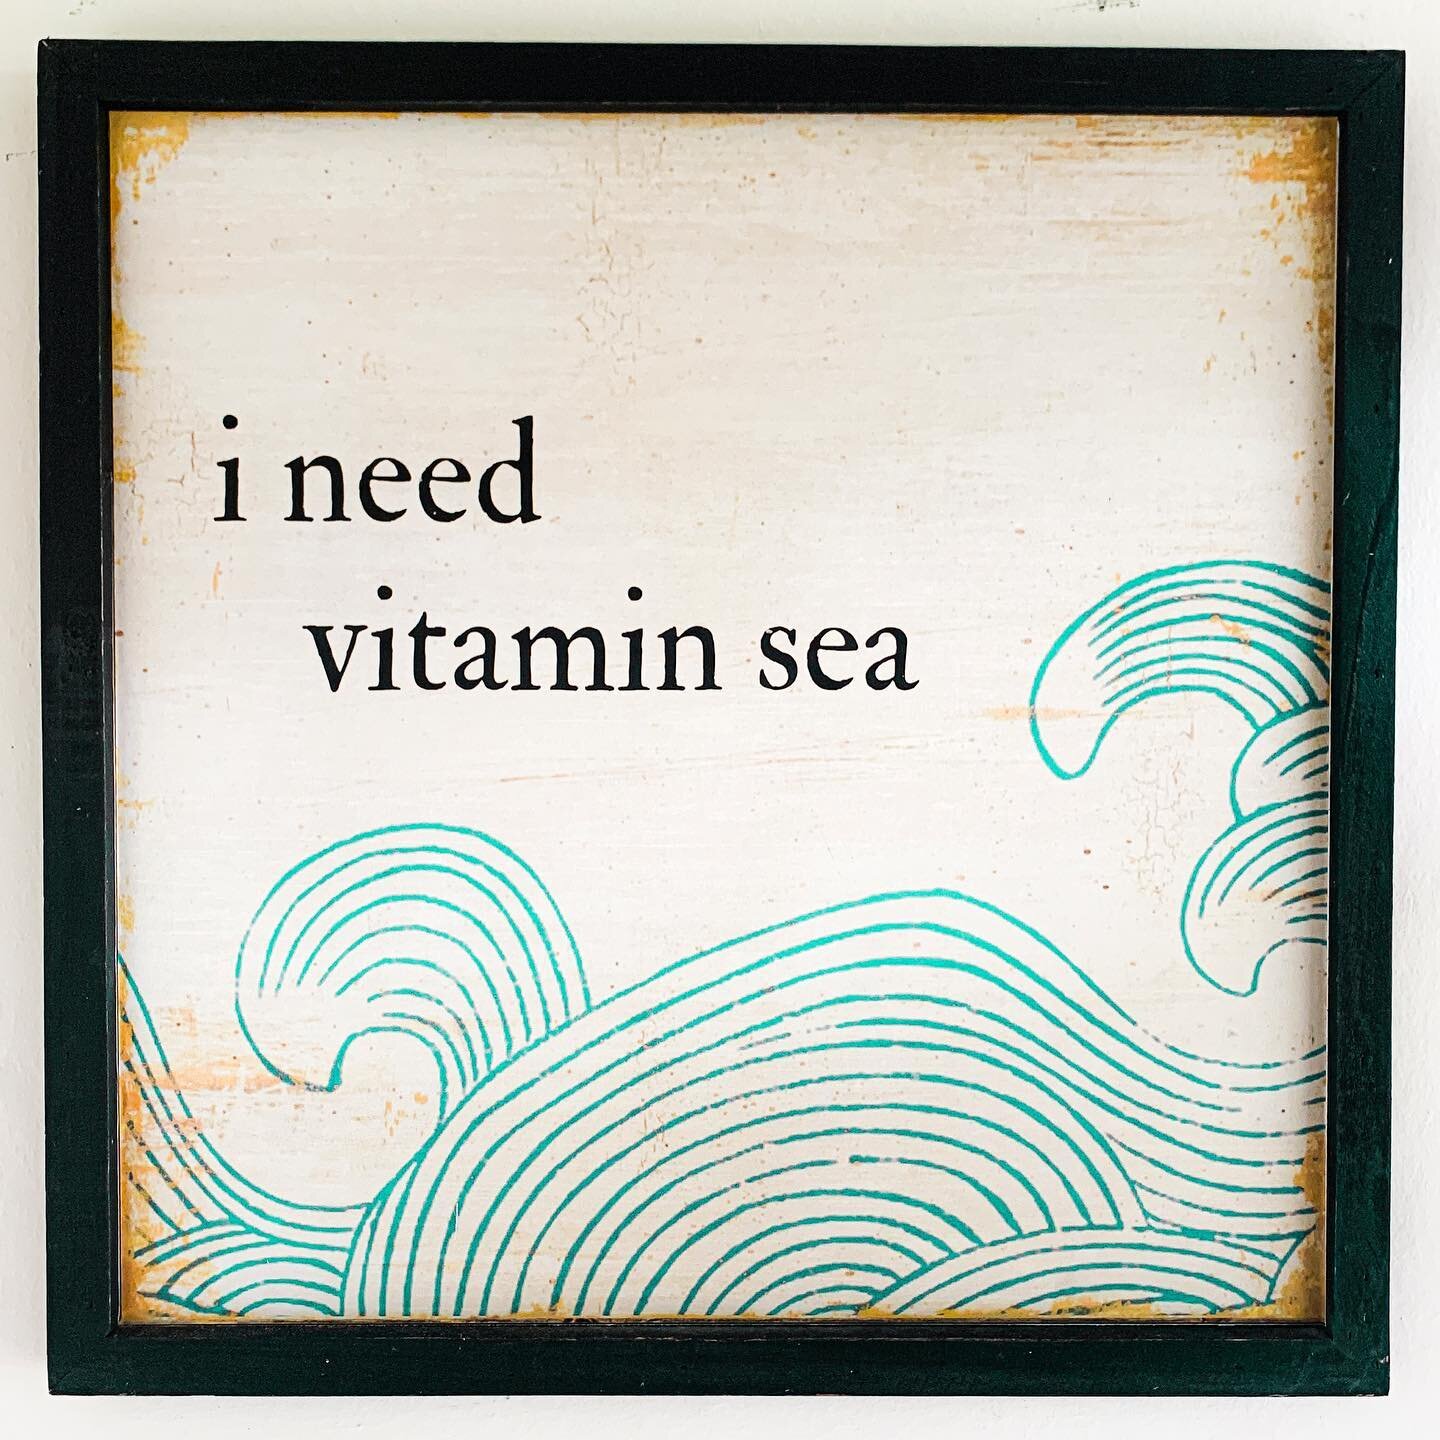 Salt Water ~ The Natural Healer

Anyone who loves the ocean like we do knows the powerful effect playing in the waves or going for a salty float can have on your mind, body &amp; soul. 

#ineedvitaminsea 
#HideawayArt